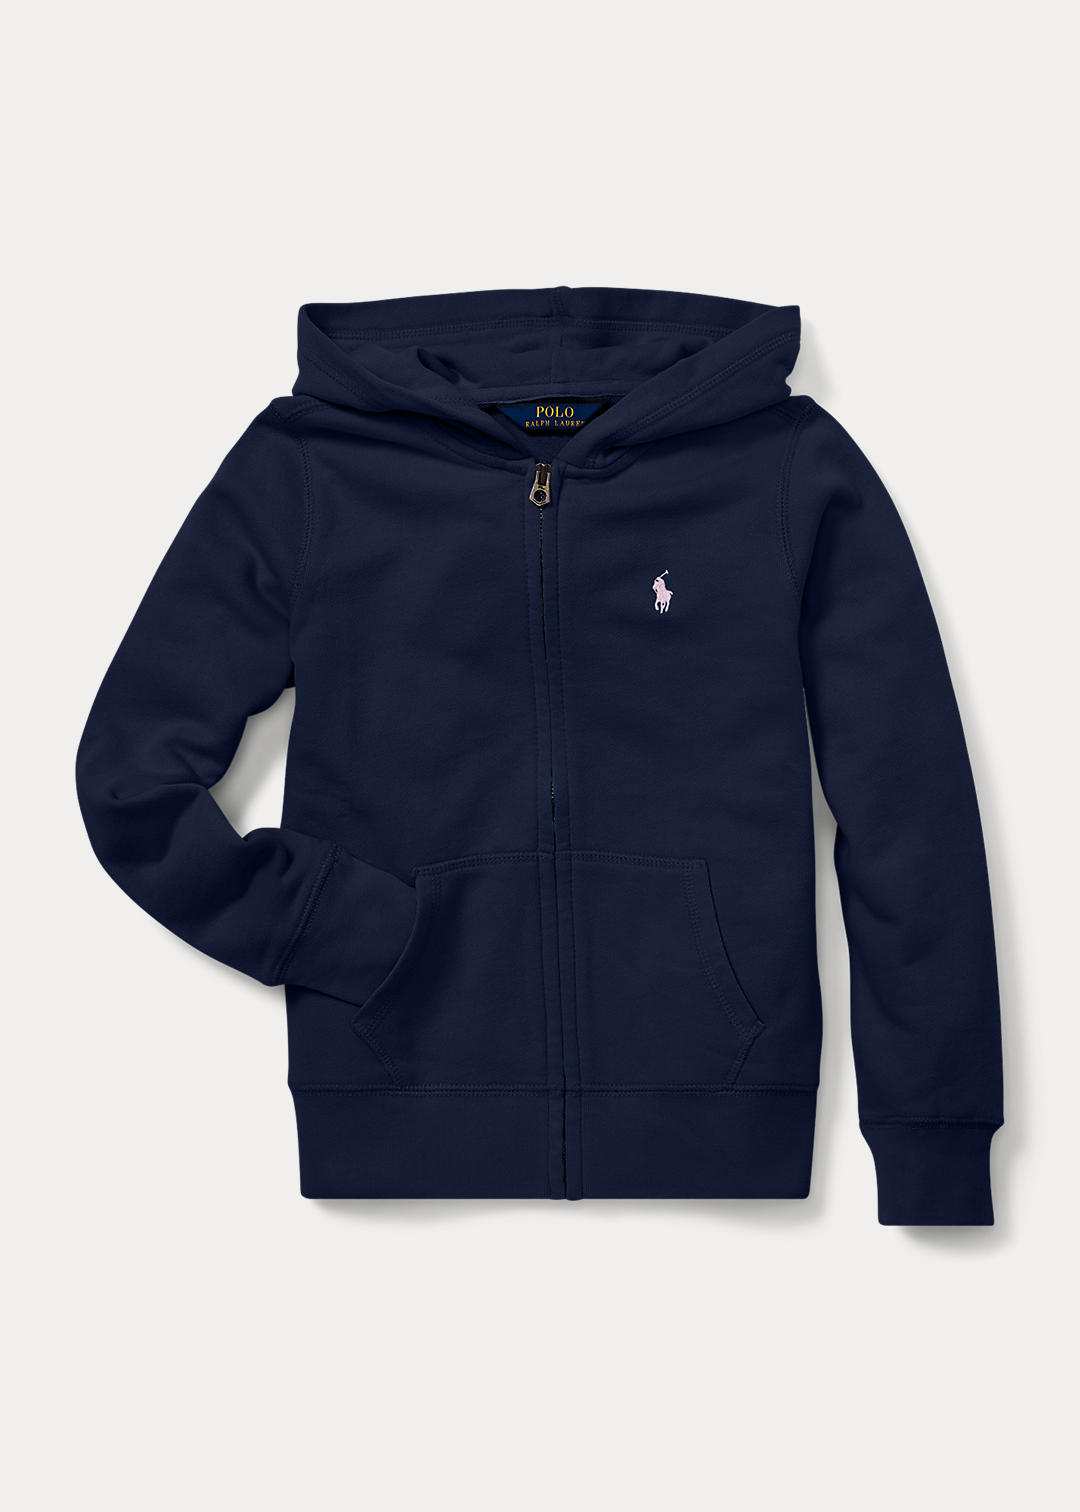 Girls 7-16 French Terry Hoodie 1